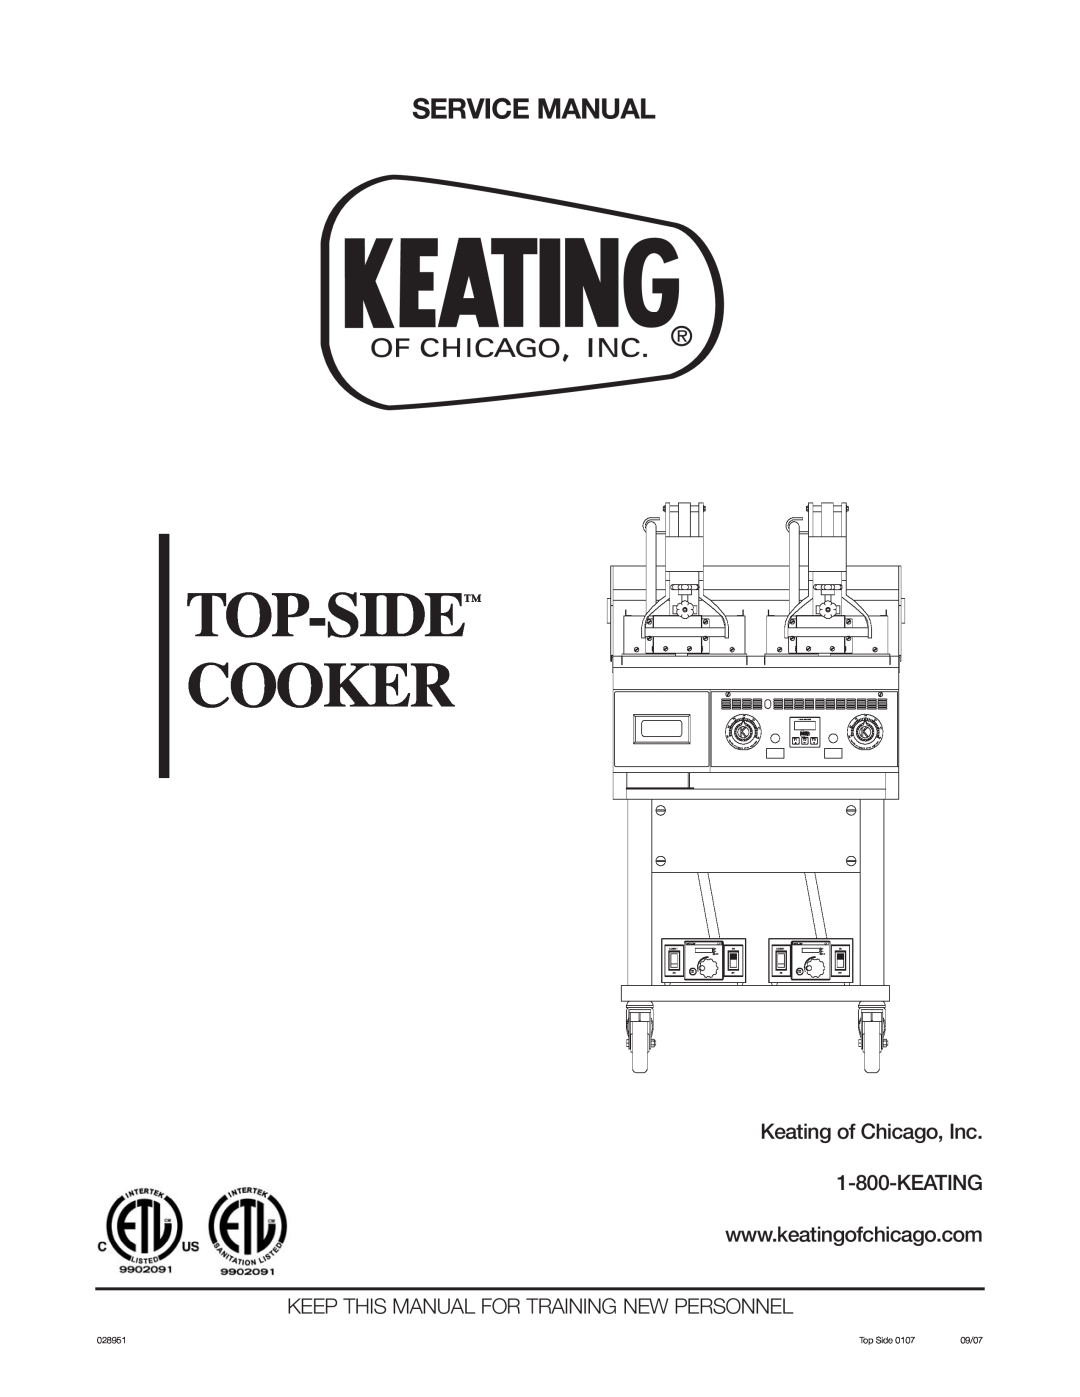 Keating Of Chicago 028951 service manual Top-Side Cooker, Keep This Manual For Training New Personnel, Top Side, 09/07 